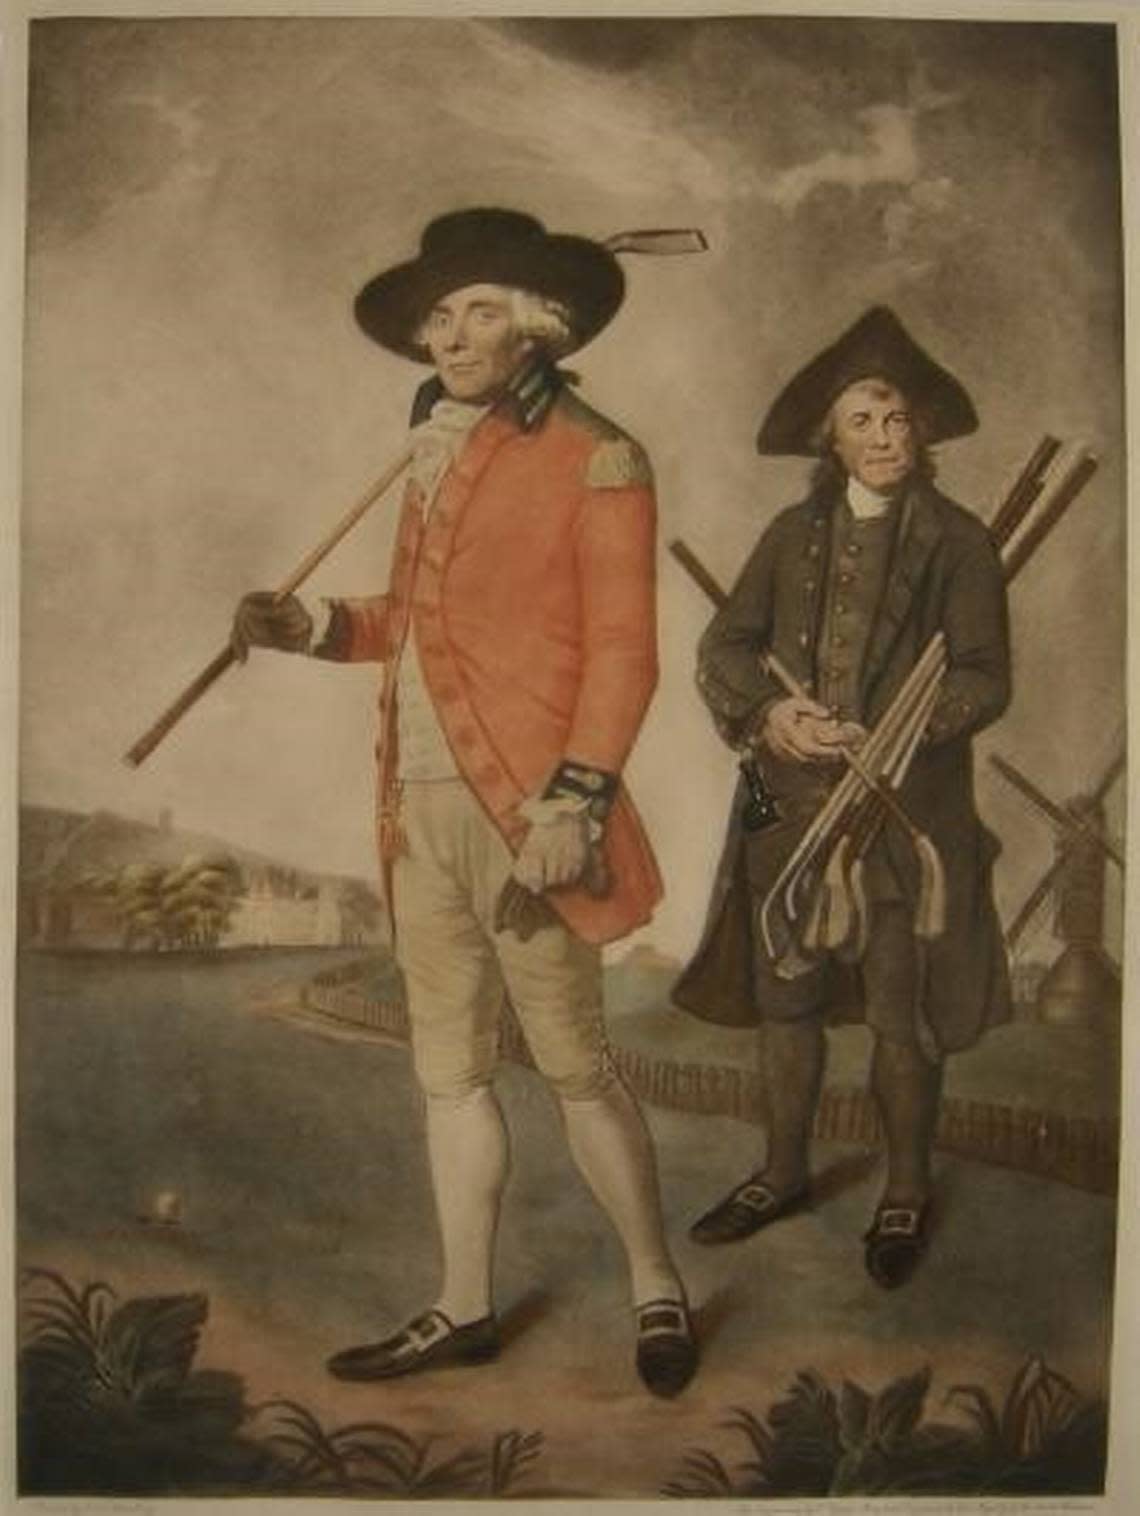 Sir William Innes, current-day mascot of the RBC Heritage, was the subject of the first published golf print in 1790. The image was adapted from an earlier painting by English portrait artist Lemuel Francis Abbott.